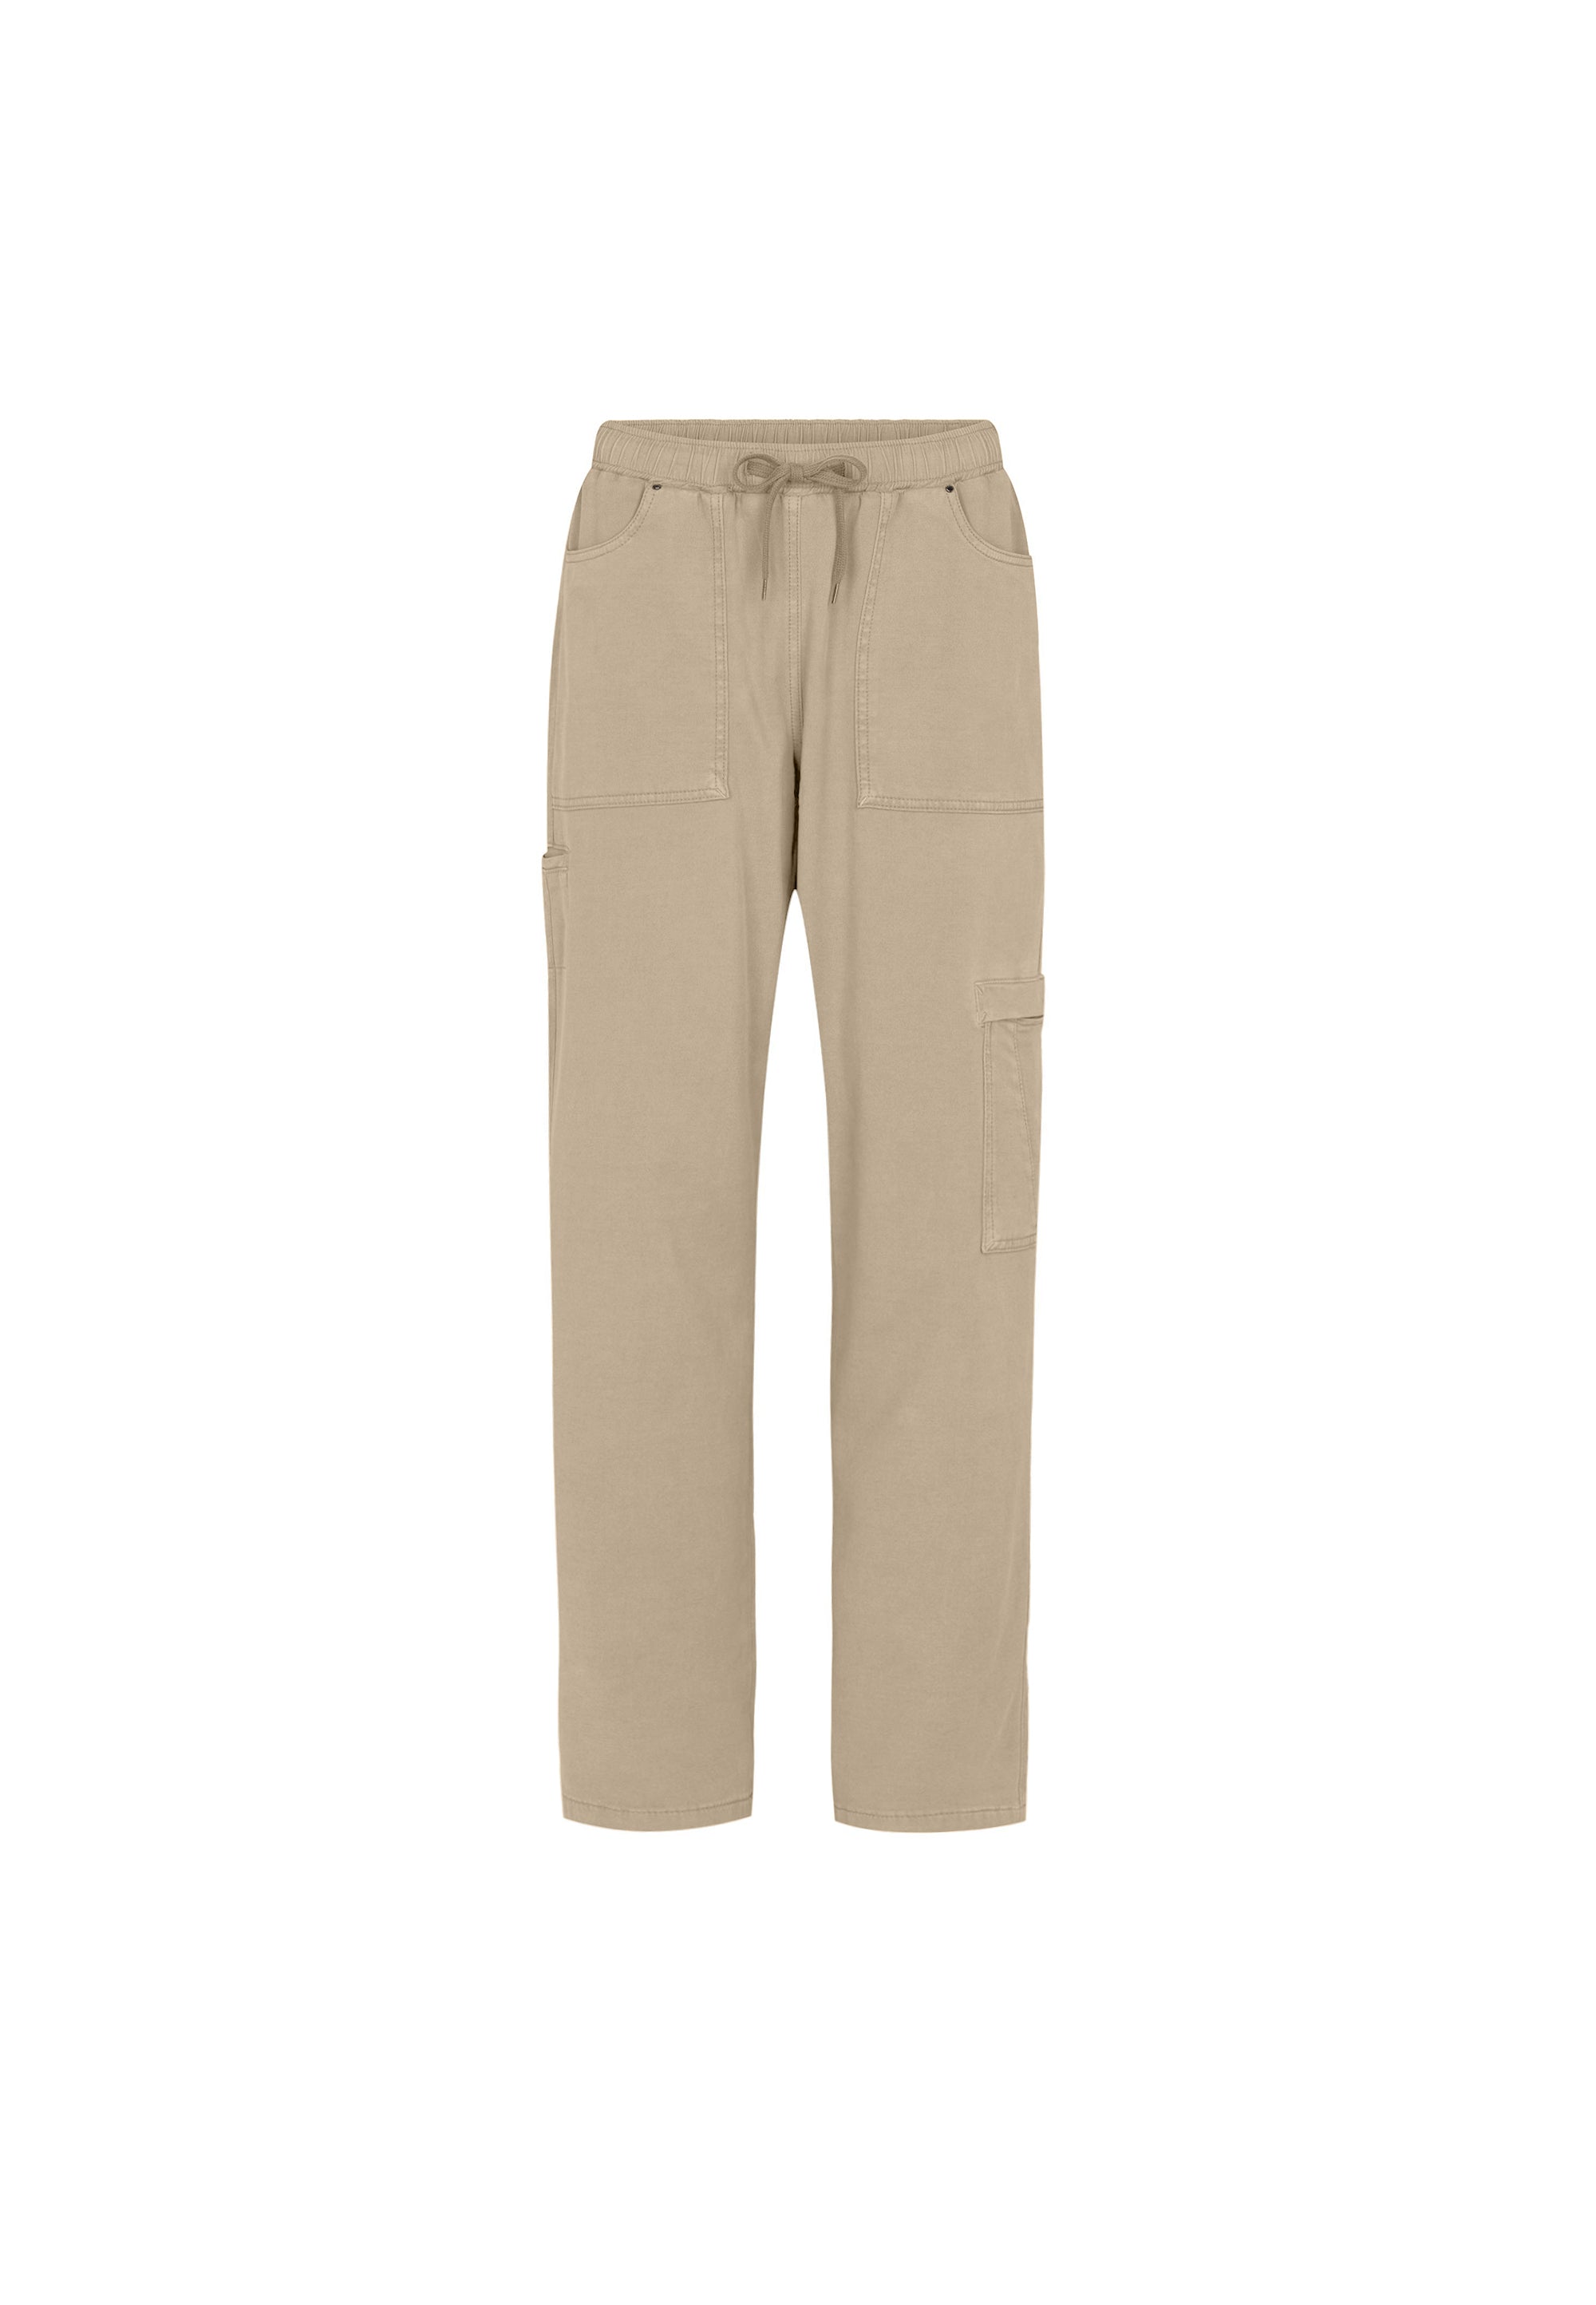 LAURIE Ofelia Cargo Relaxed - Medium Length Trousers RELAXED 26000 Safari